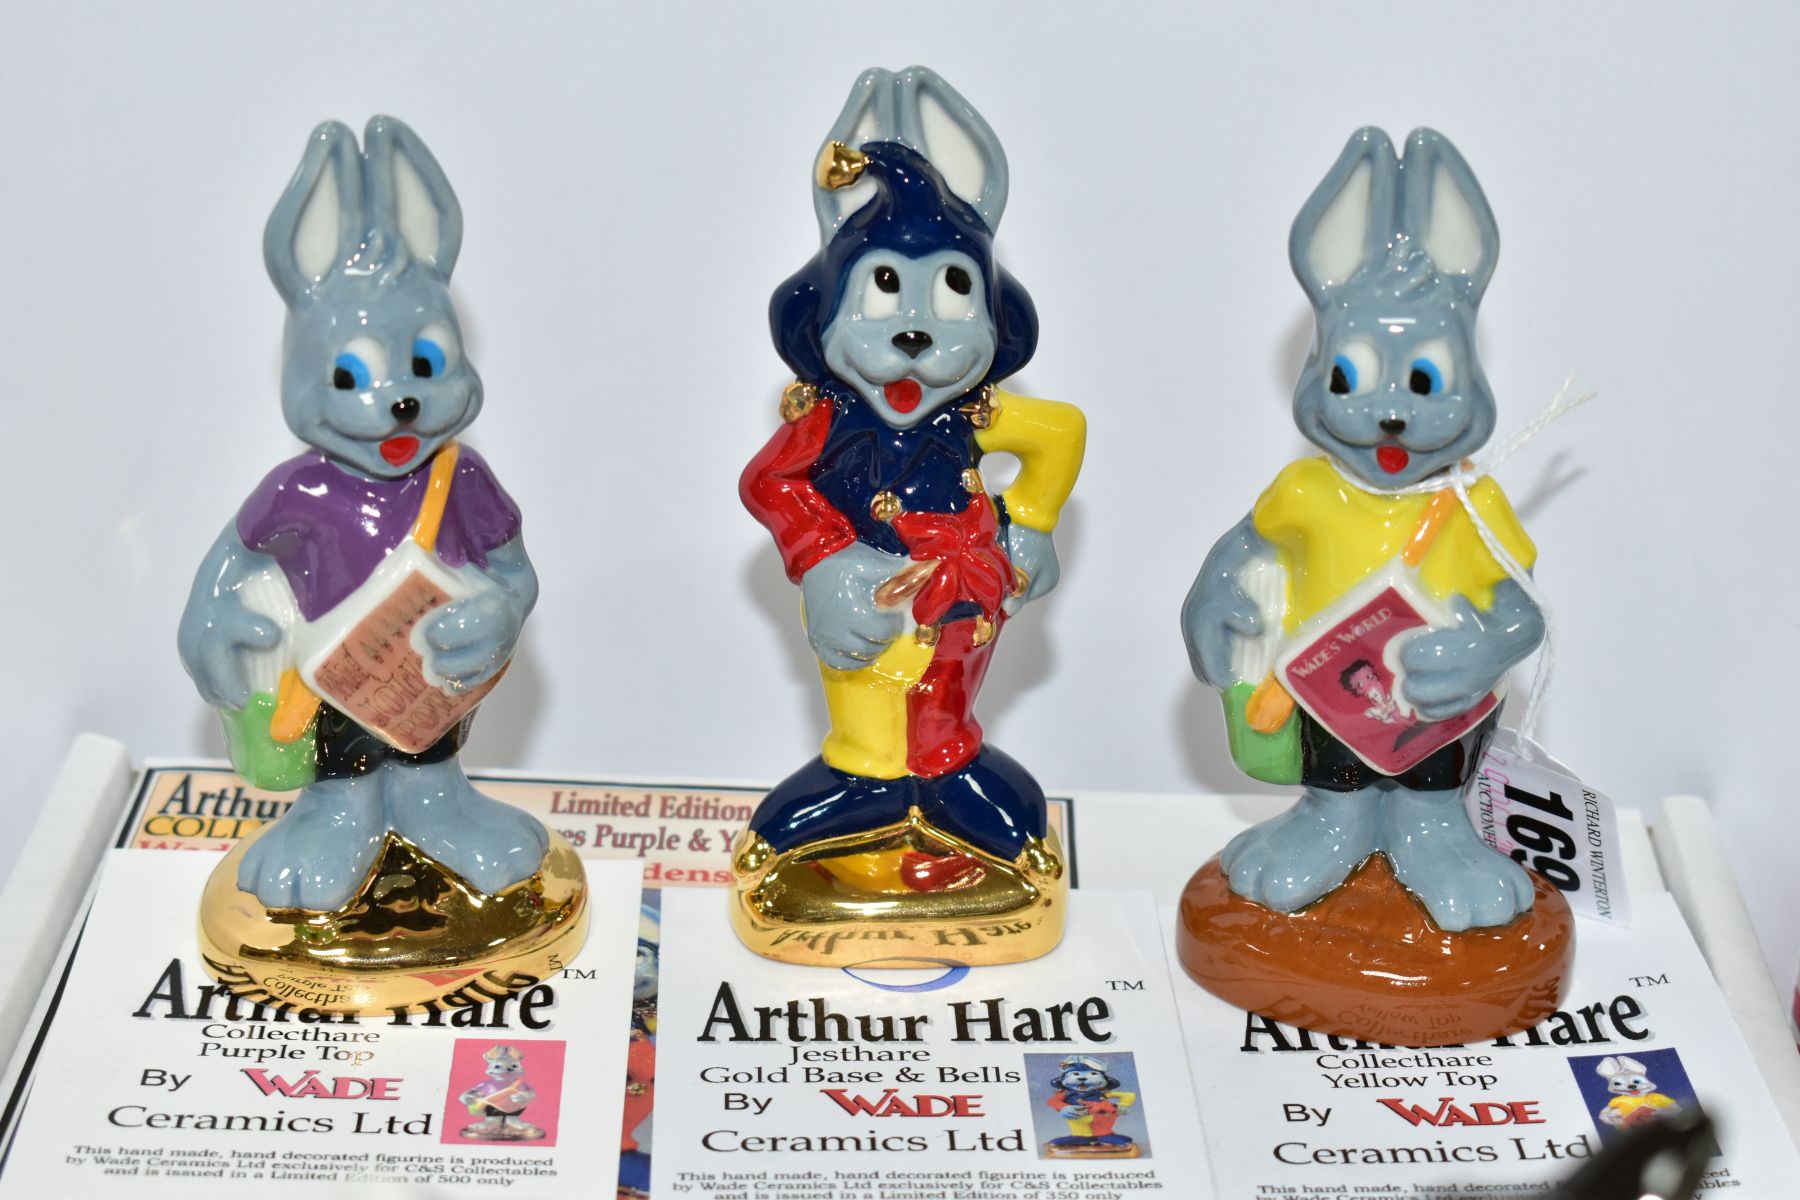 A BOXED WADE LIMITED EDITION ARTHUR HARE COLLECTORS SET FROM 'WADE FAIR TRENTHAM GARDENS 11TH